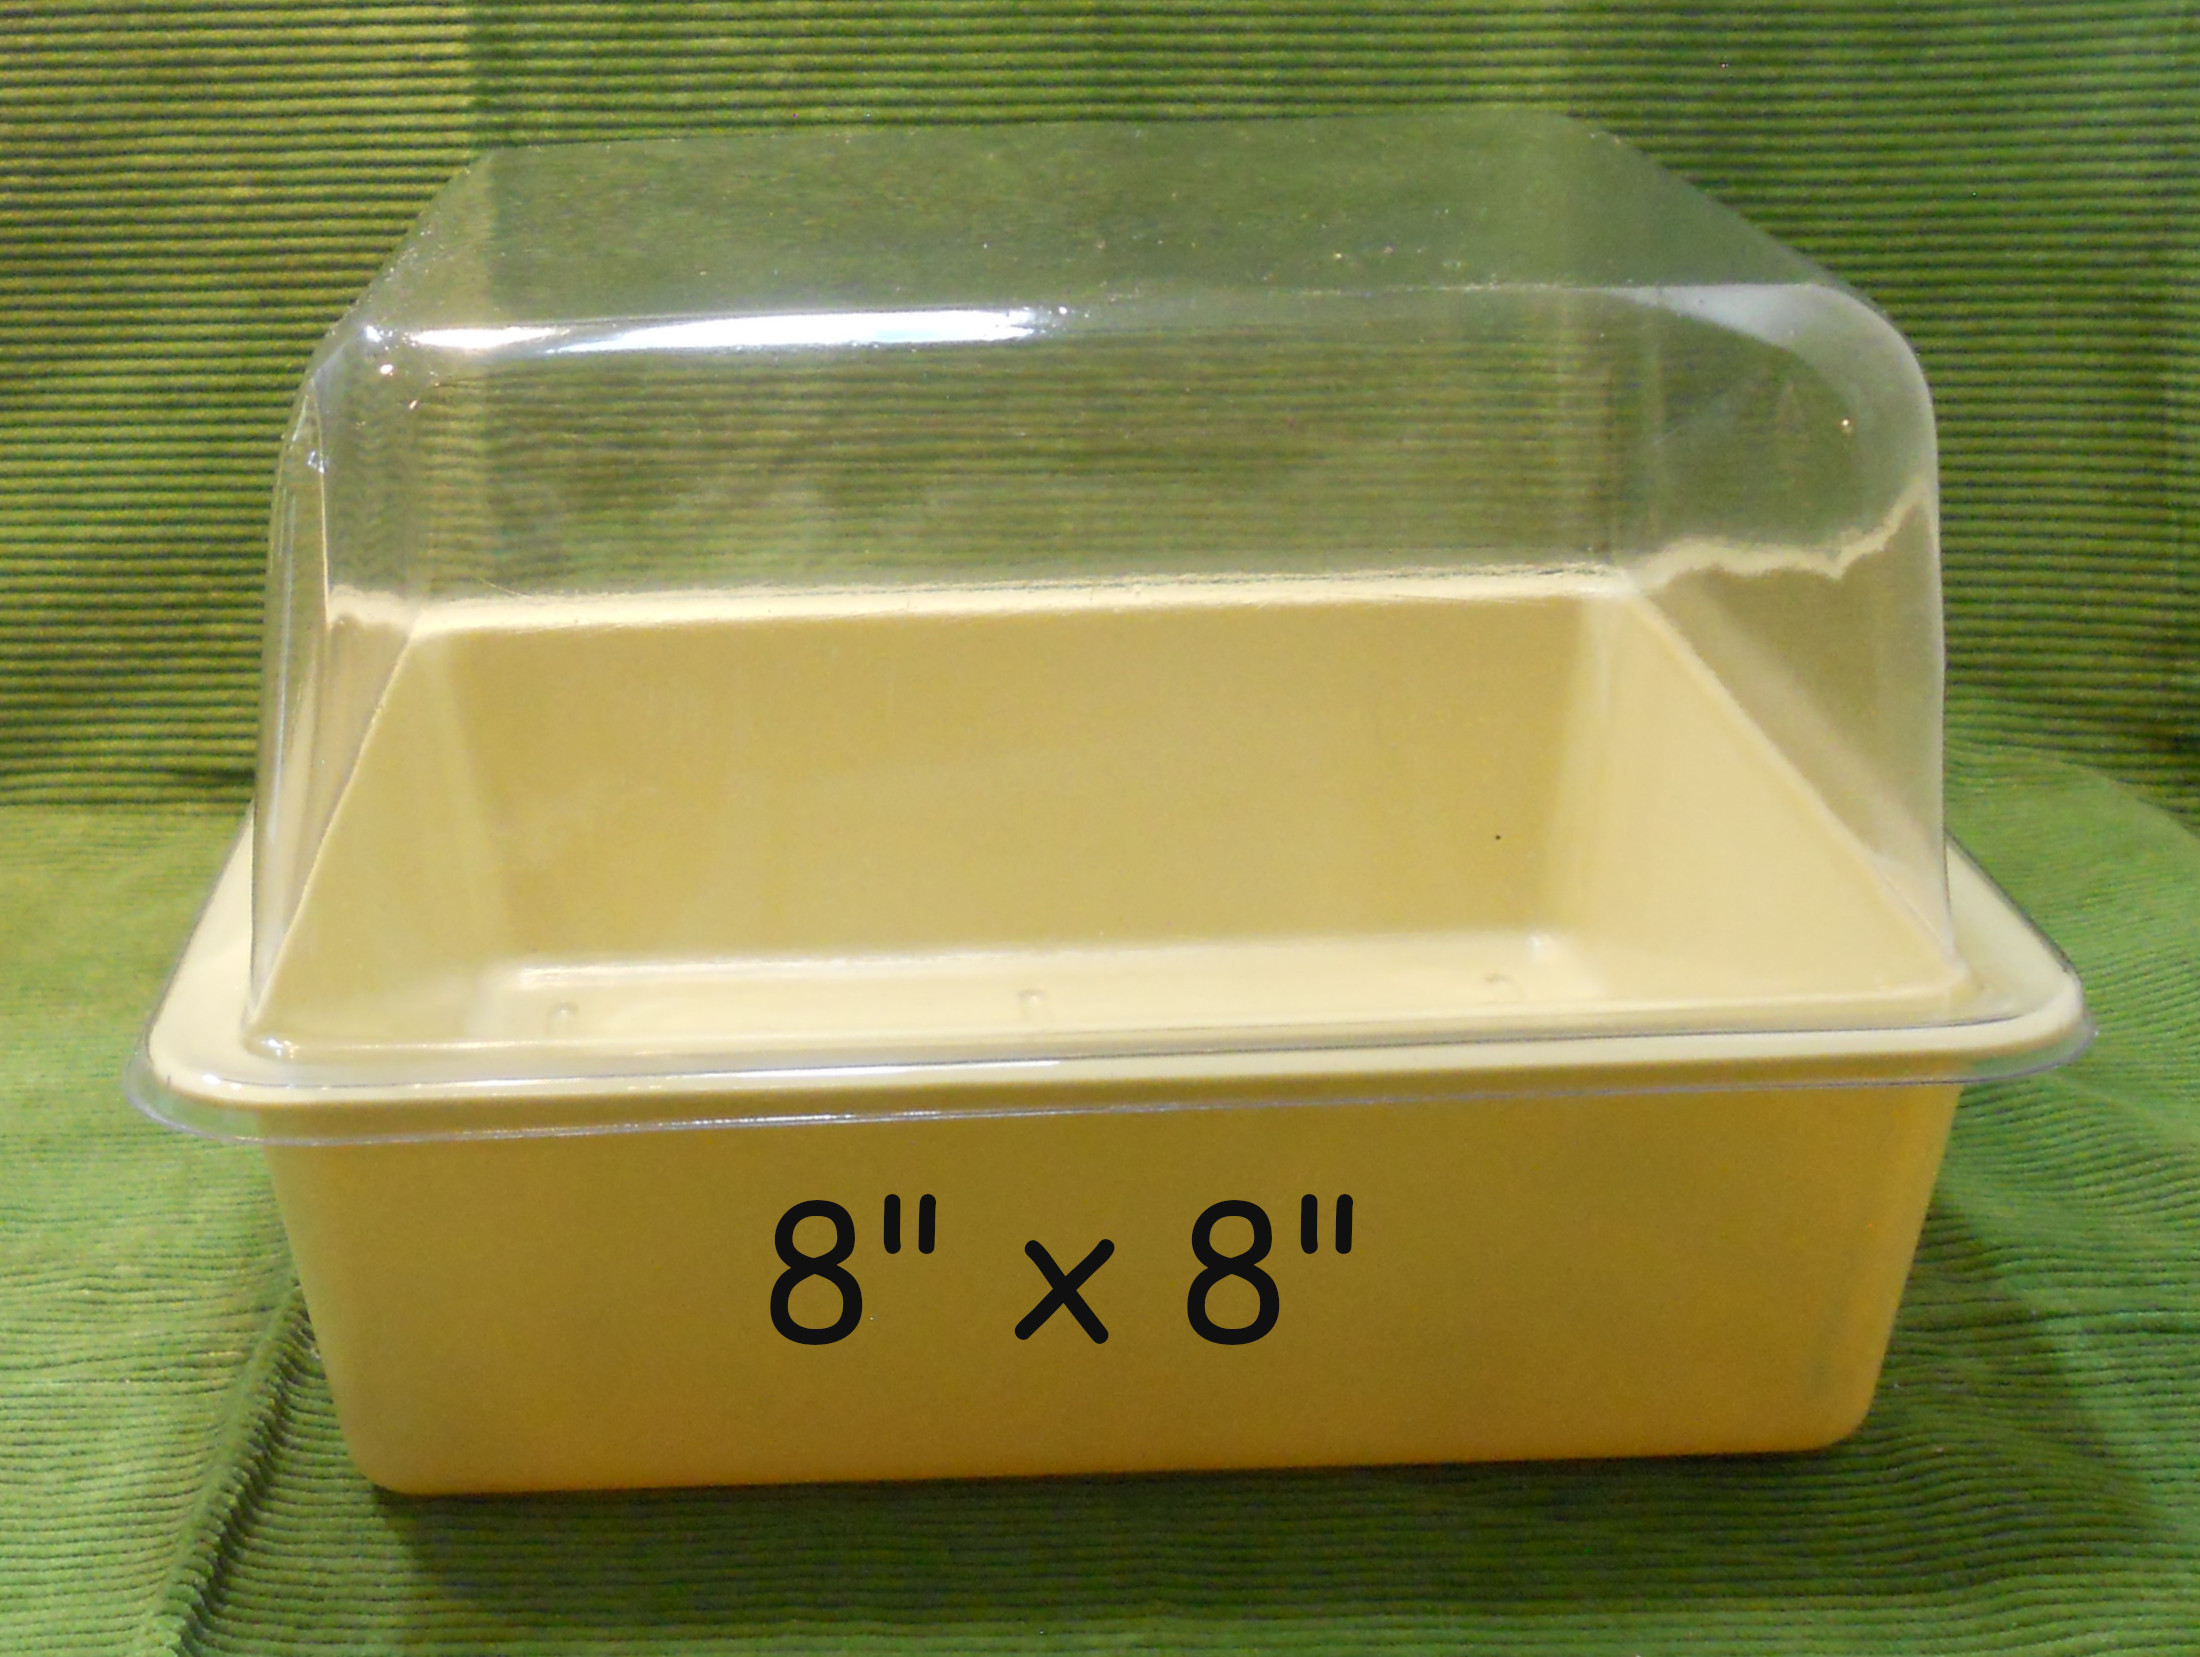 8 x 8" tray with dome